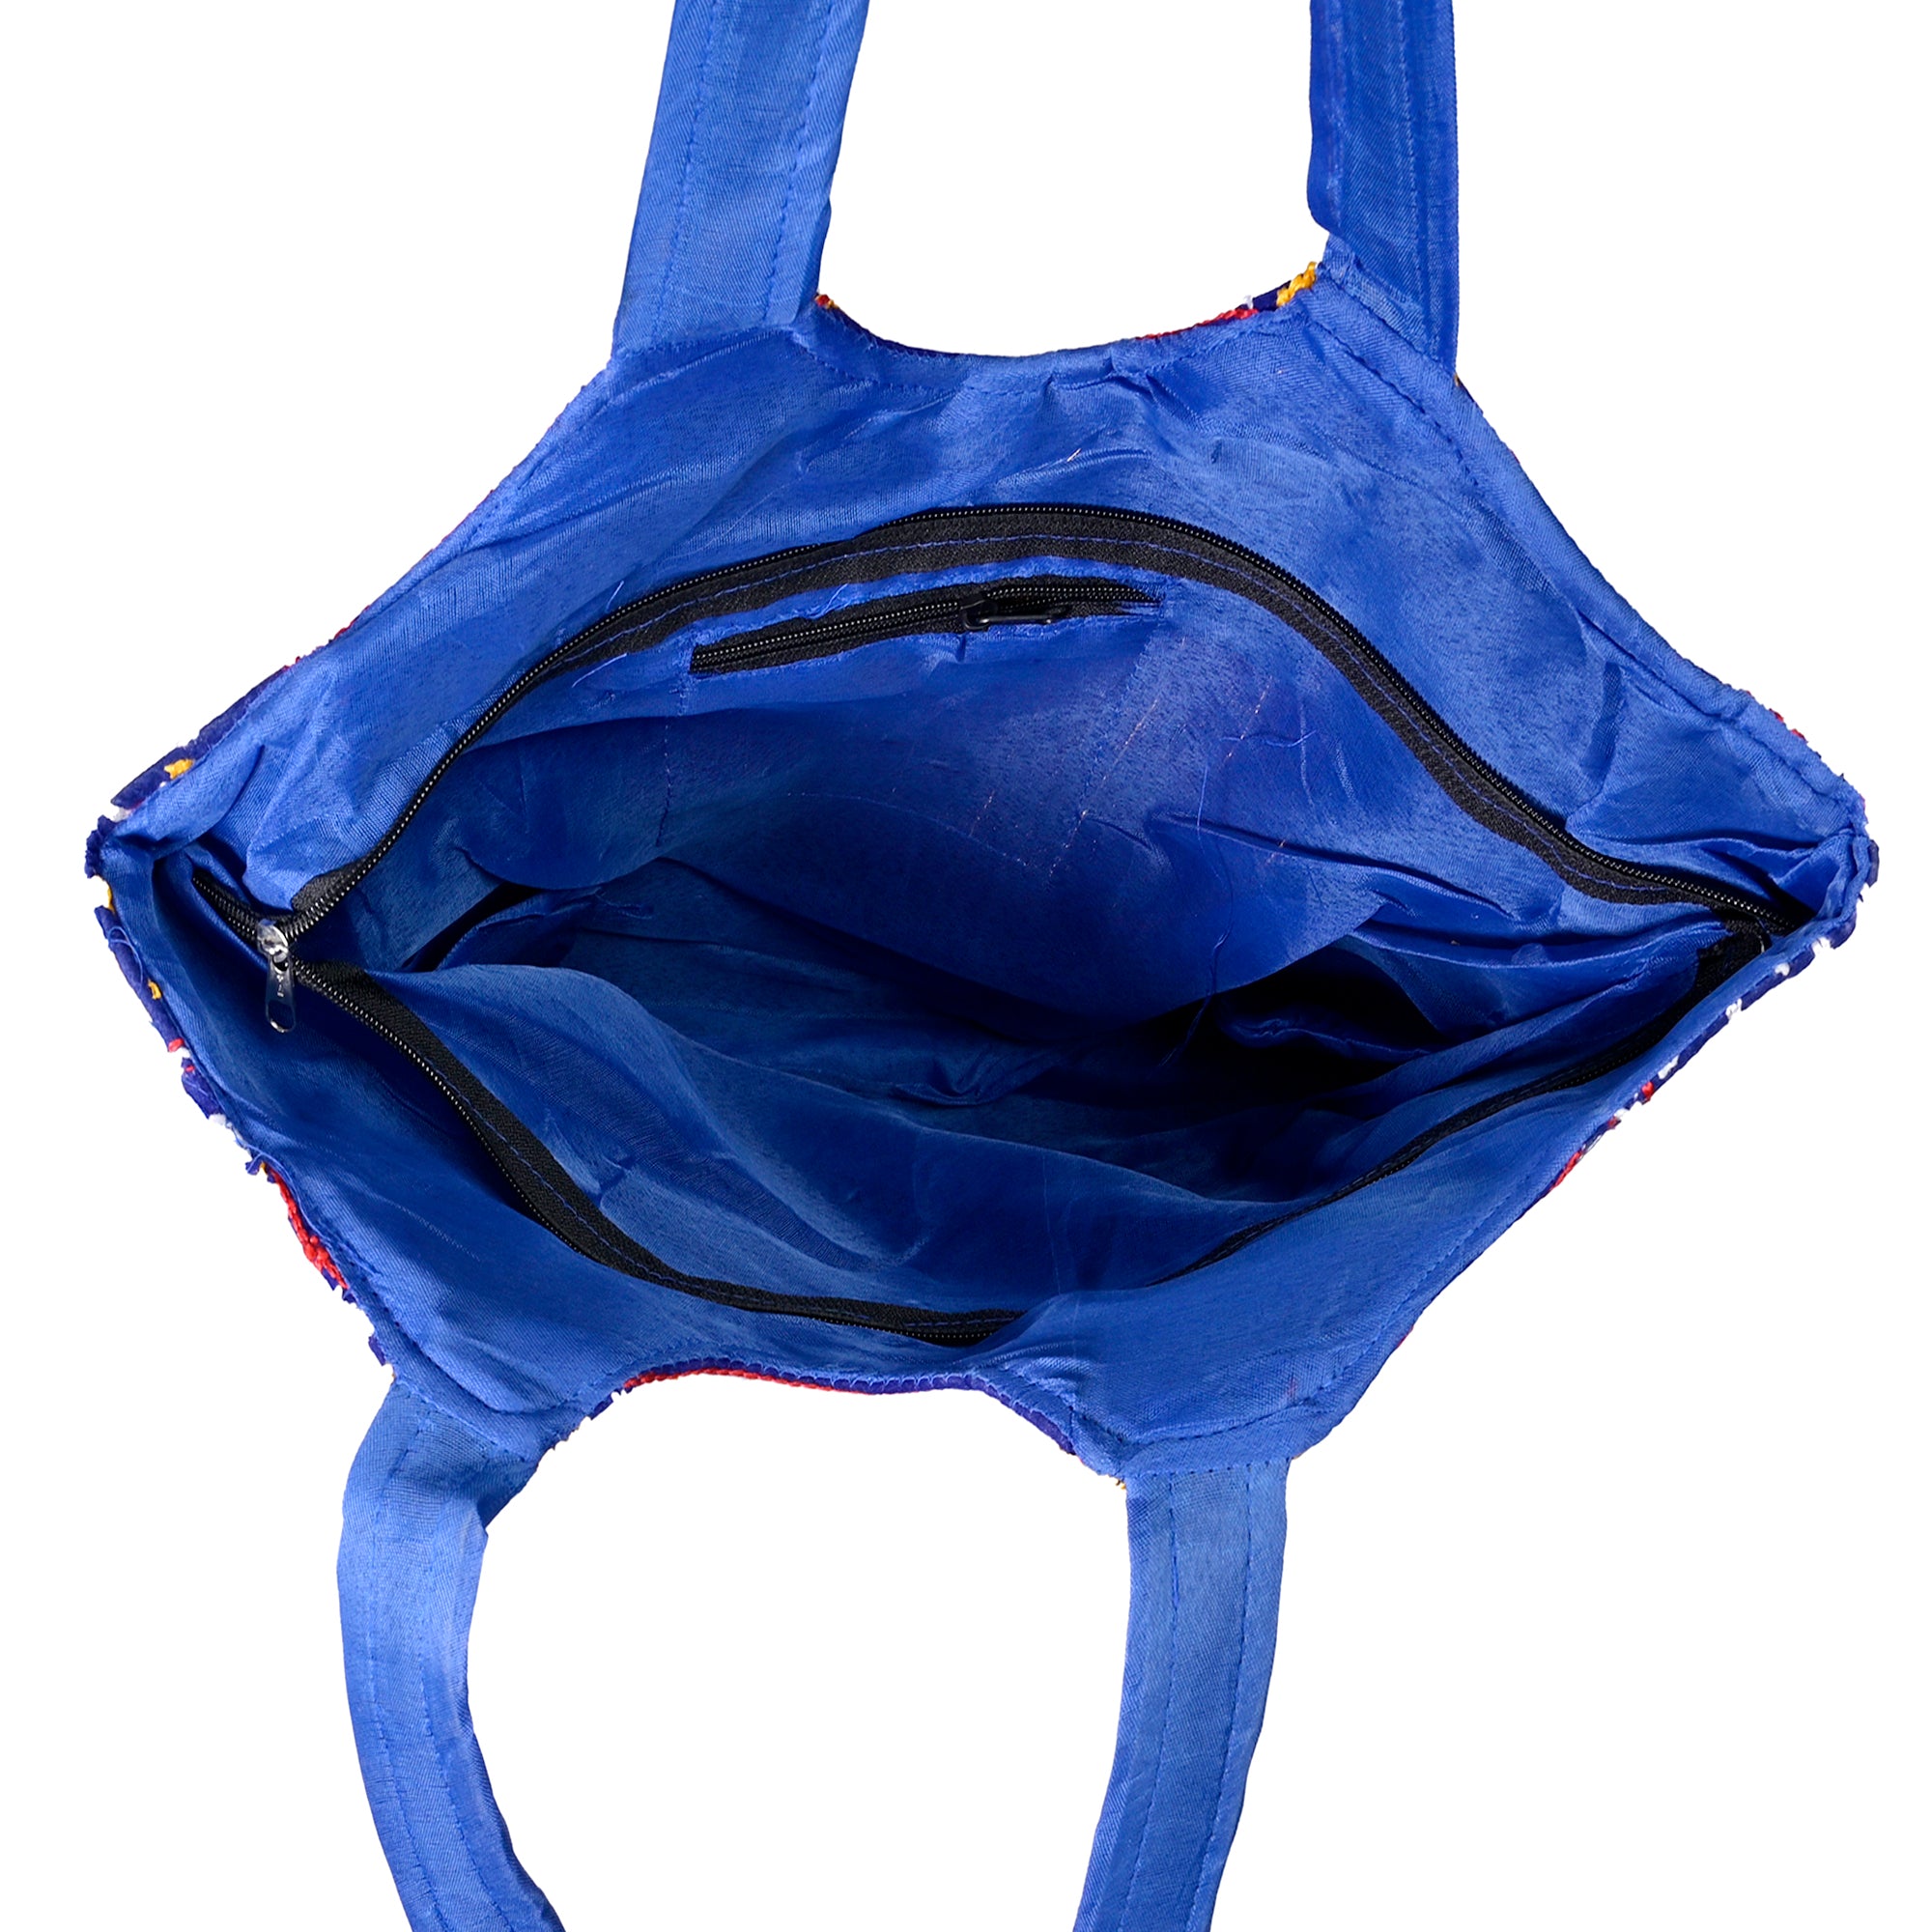 Purchase Wholesale sling bag with guitar accessories. Free Returns & Net 60  Terms on Faire